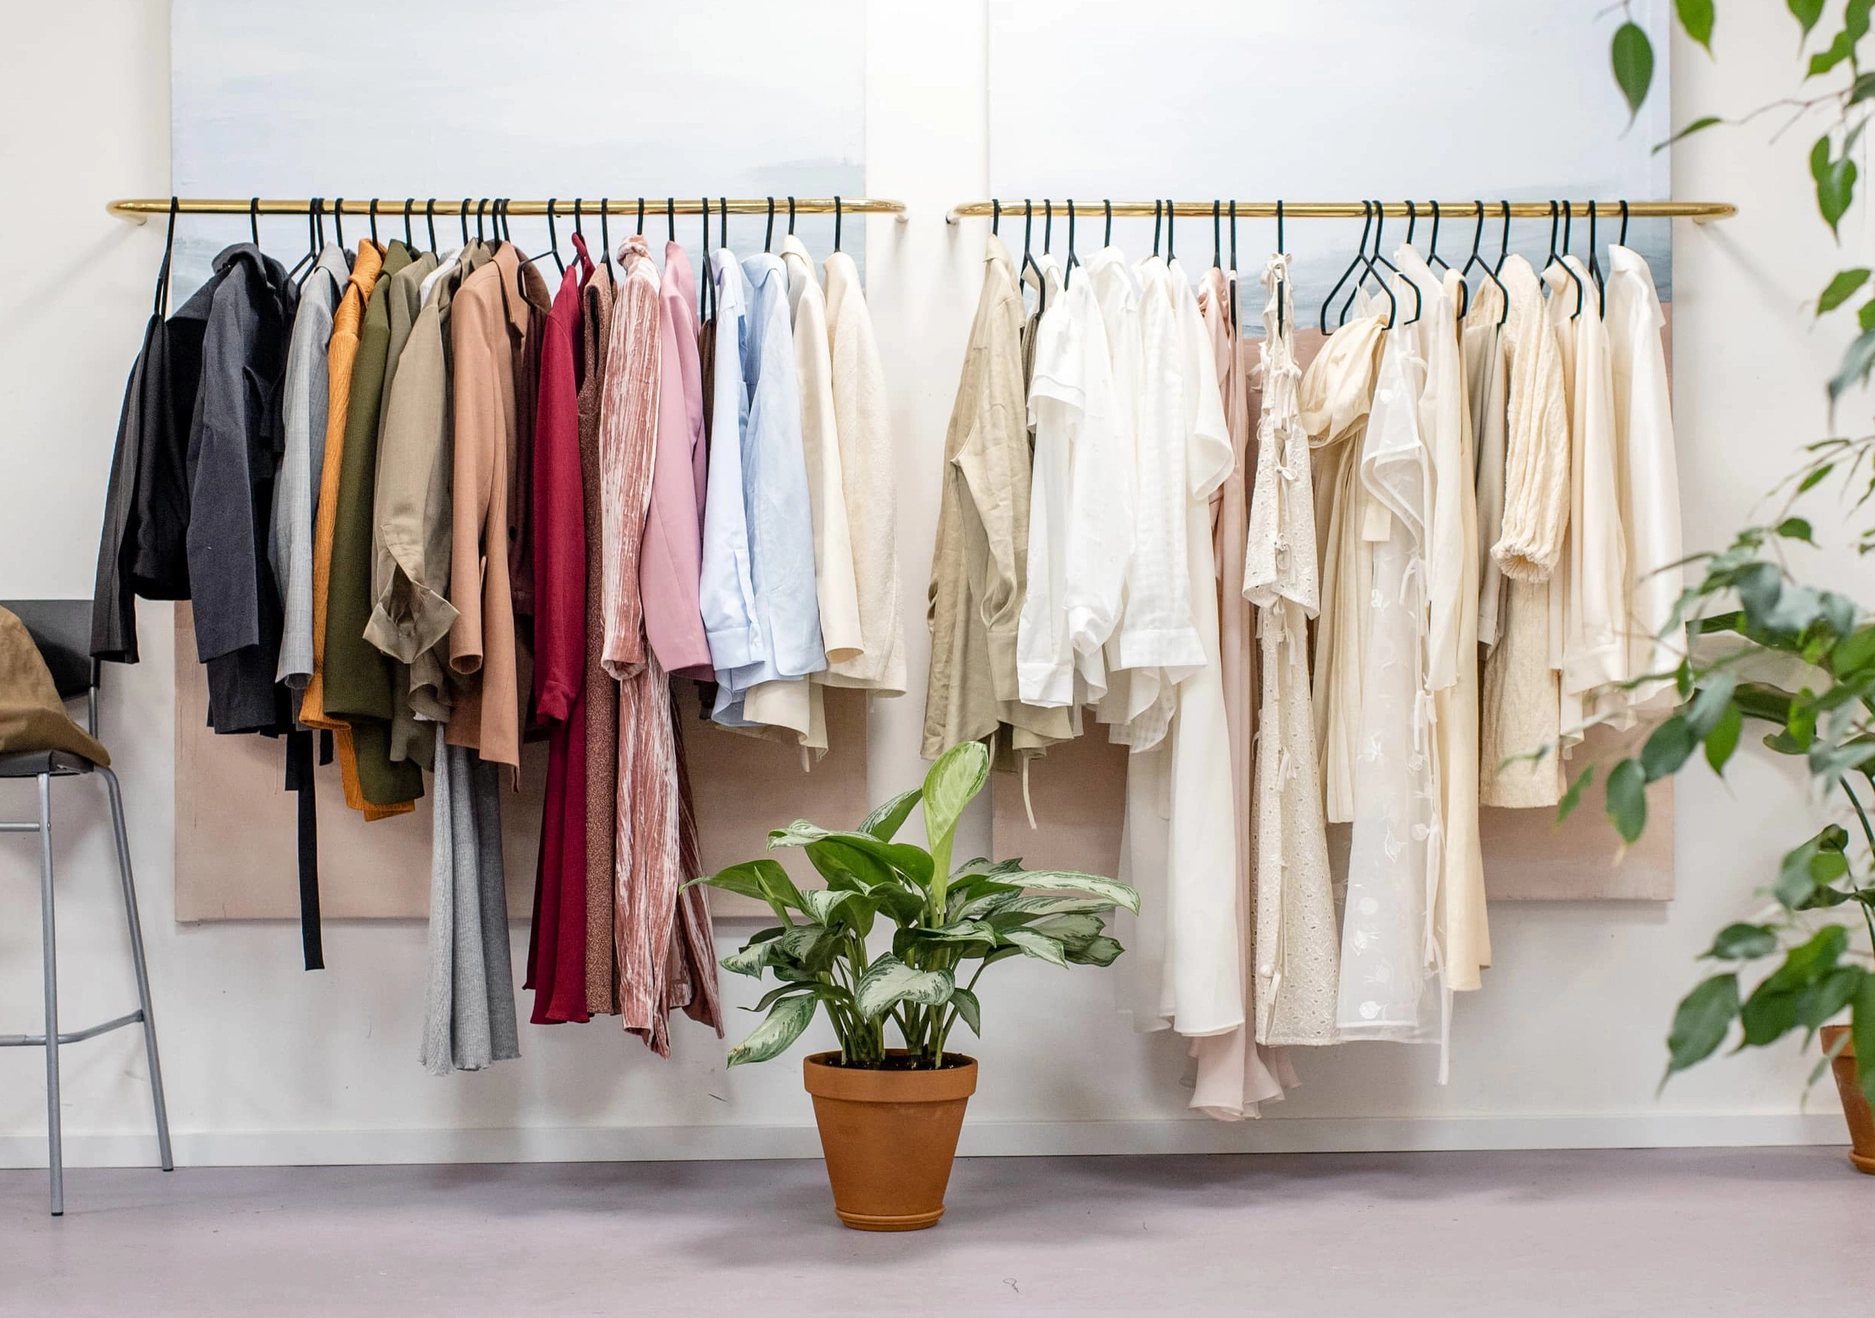 Wholesale Clothing: What It Is and Why It's Important for Businesses